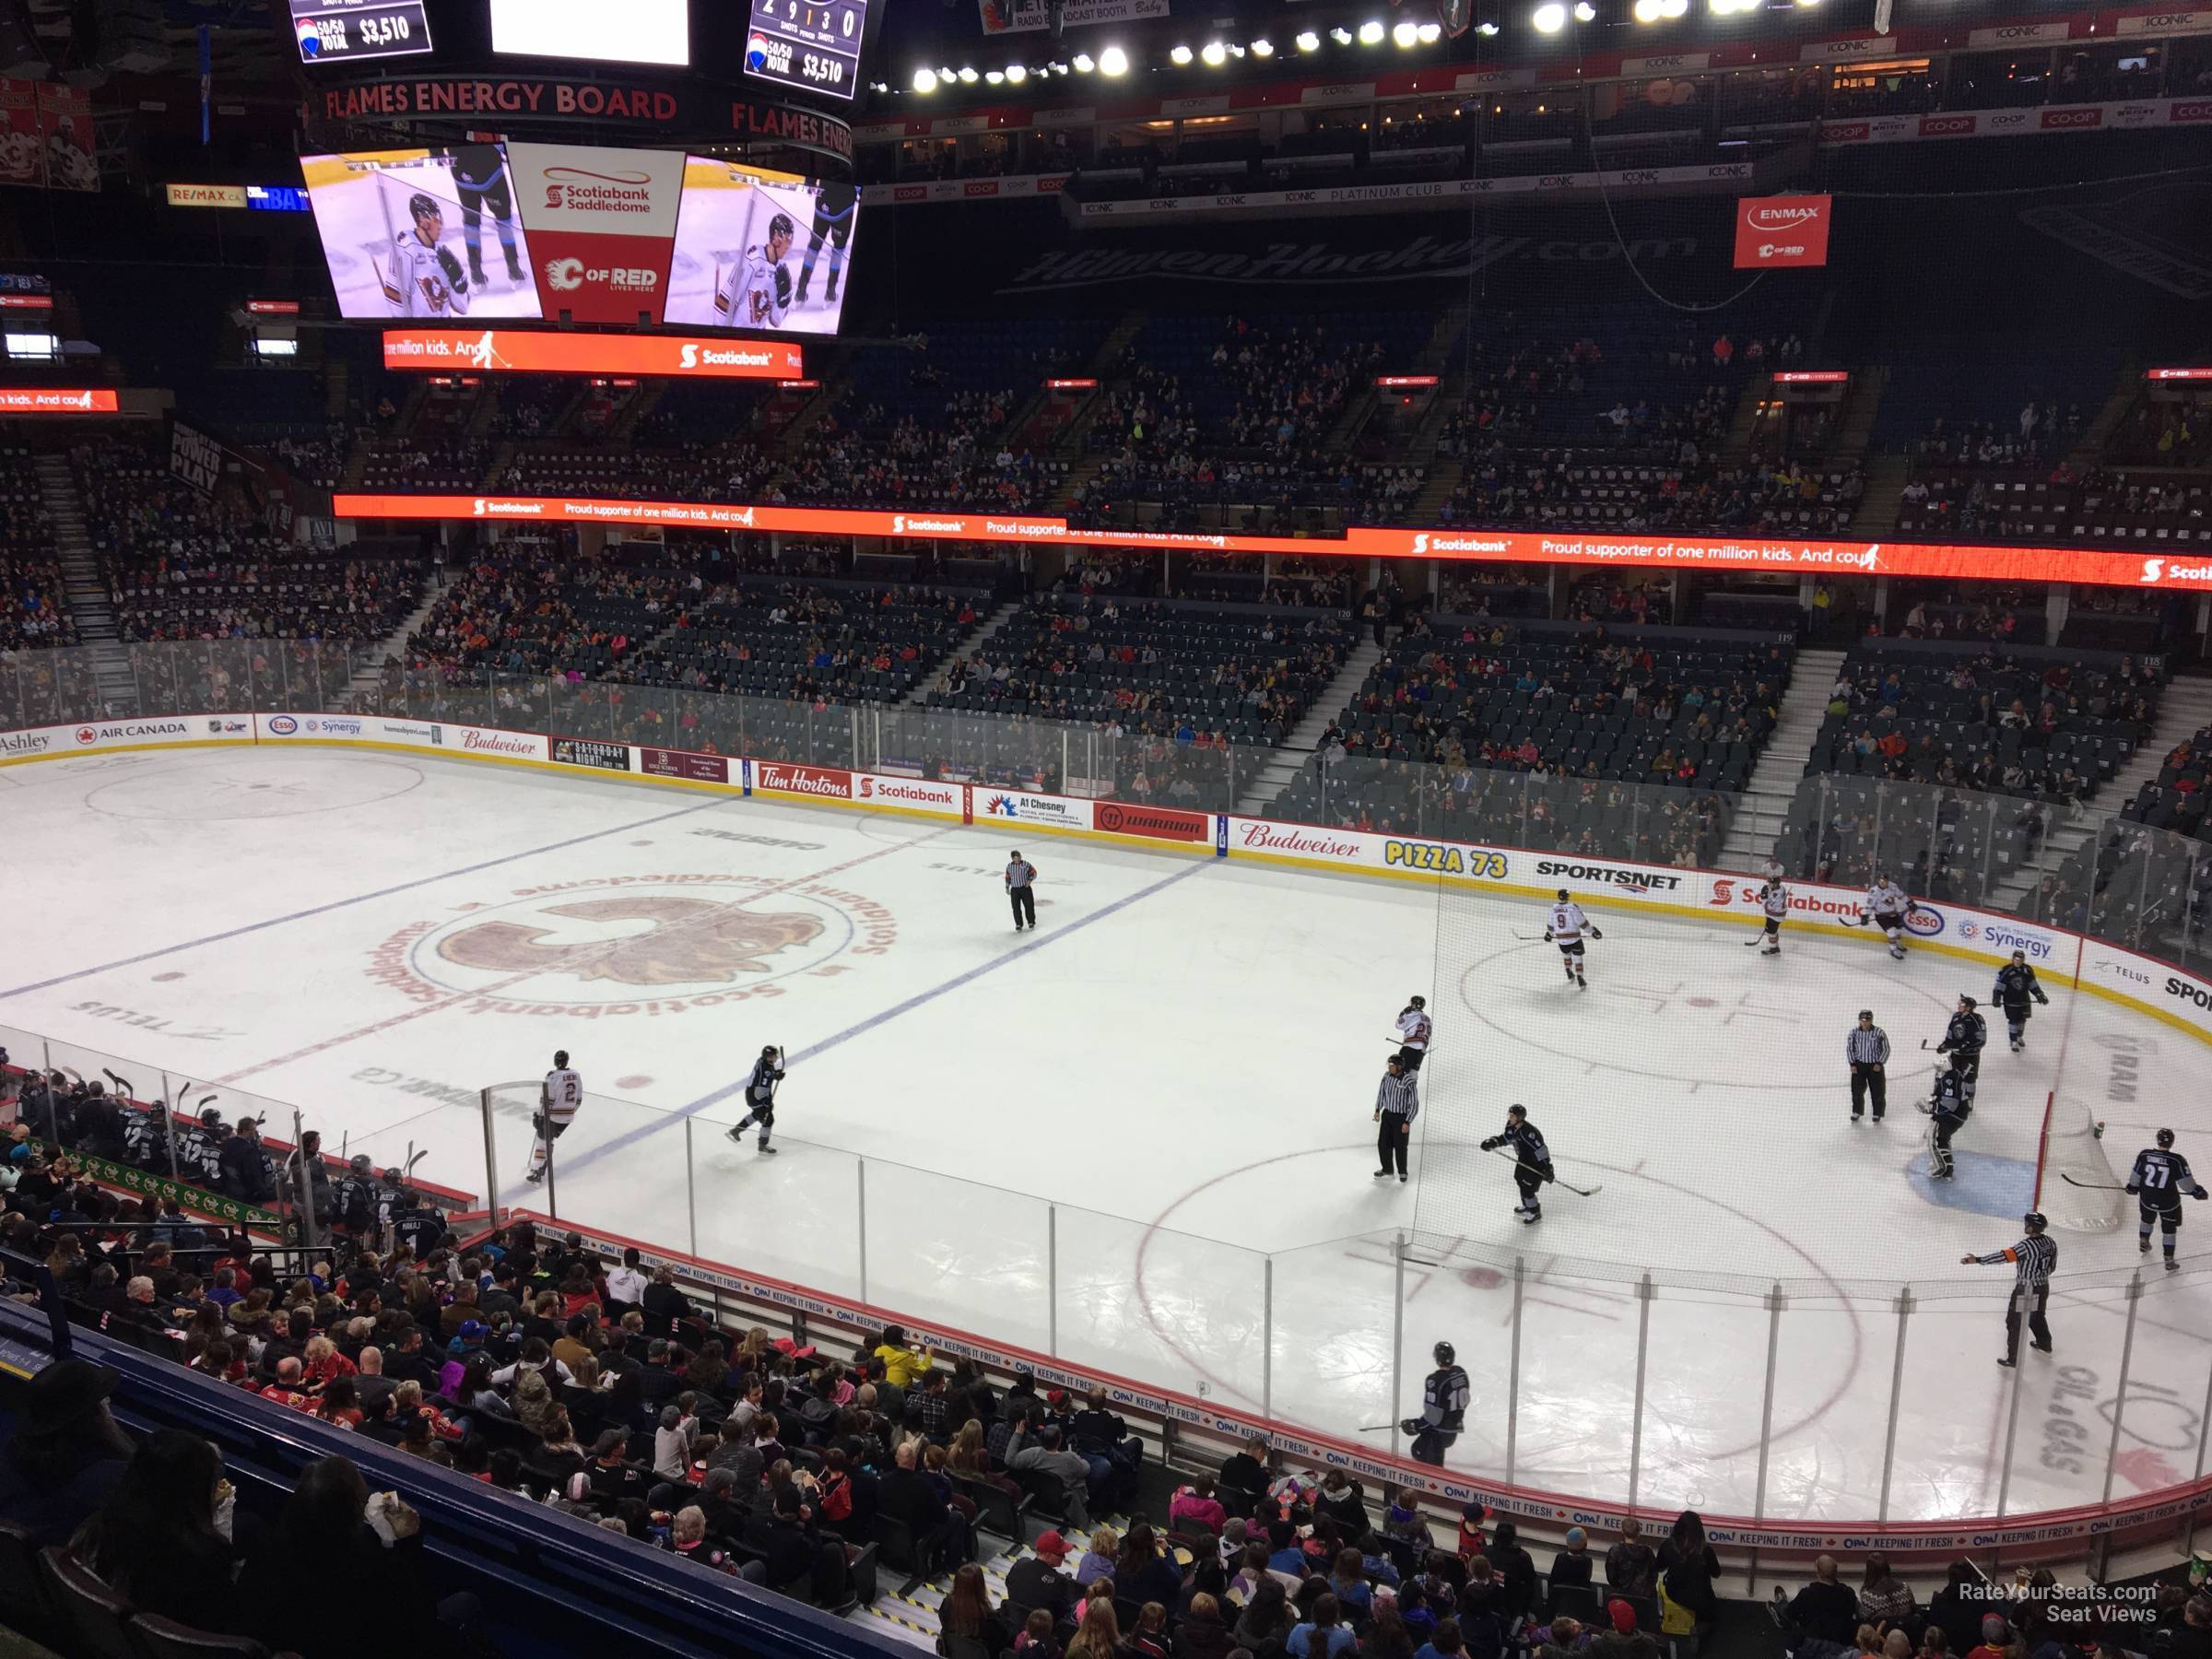 section 214, row 5 seat view  for hockey - scotiabank saddledome